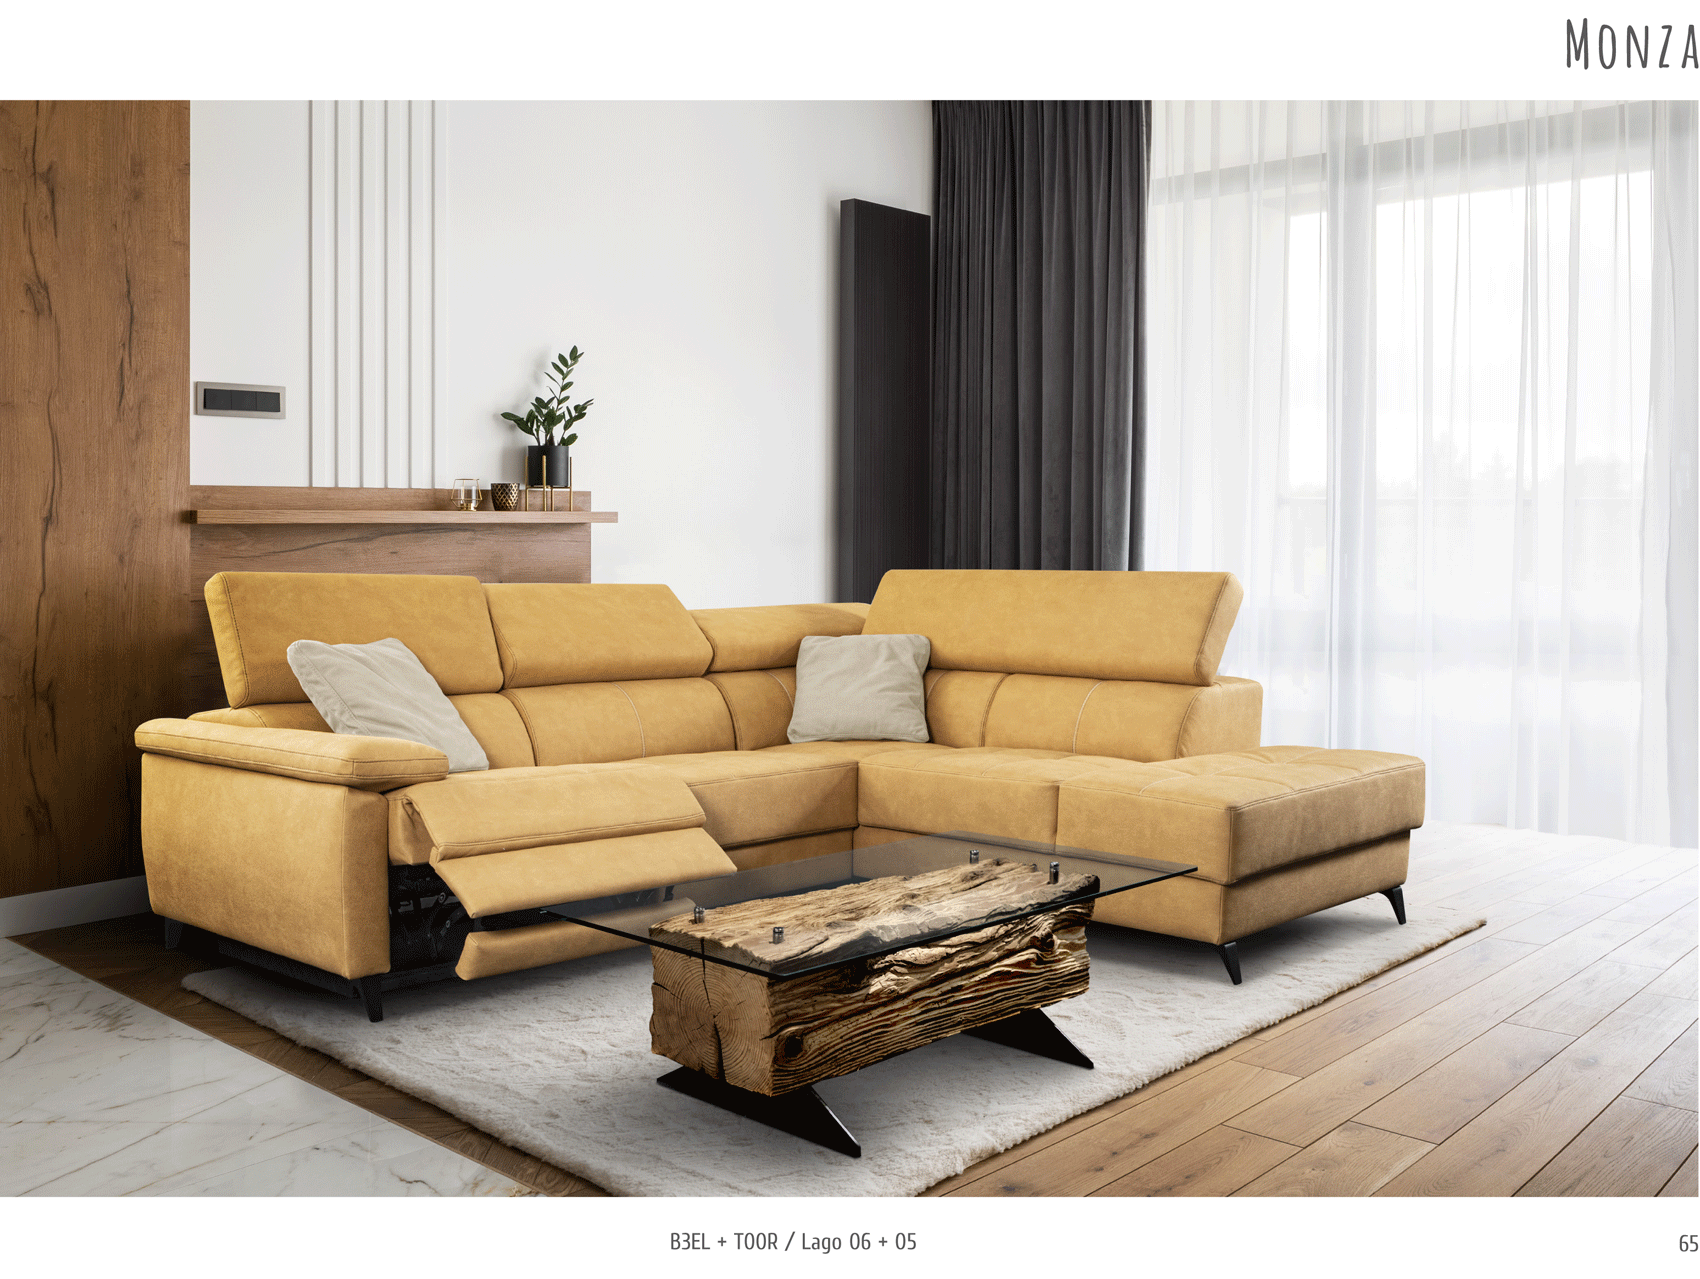 Brands European Living Collection Monza Sectional w/Recliner